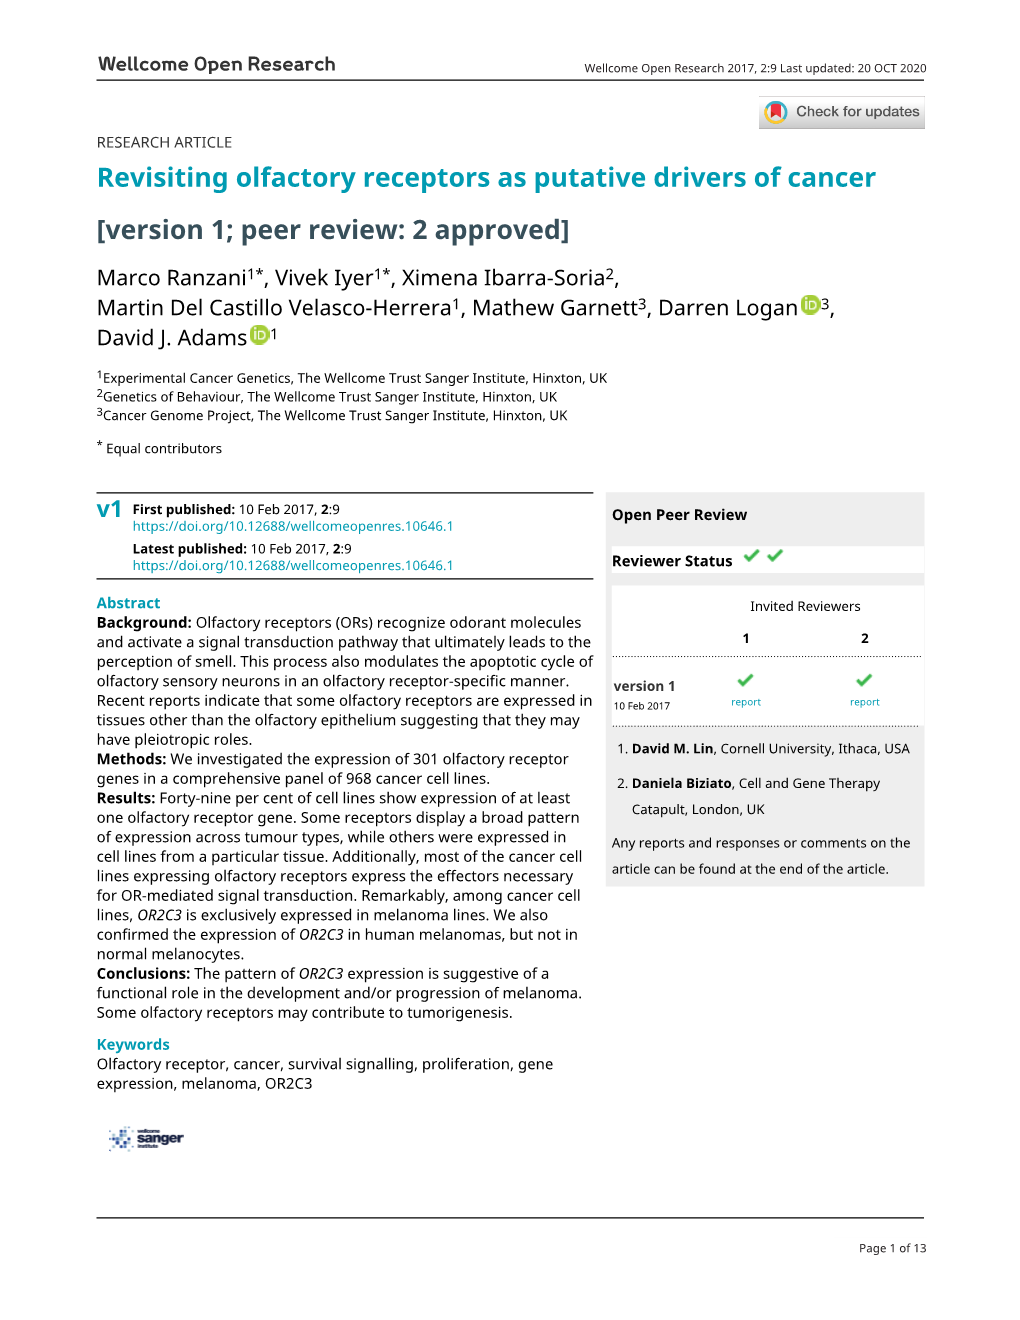 Revisiting Olfactory Receptors As Putative Drivers of Cancer [Version 1; Peer Review: 2 Approved]